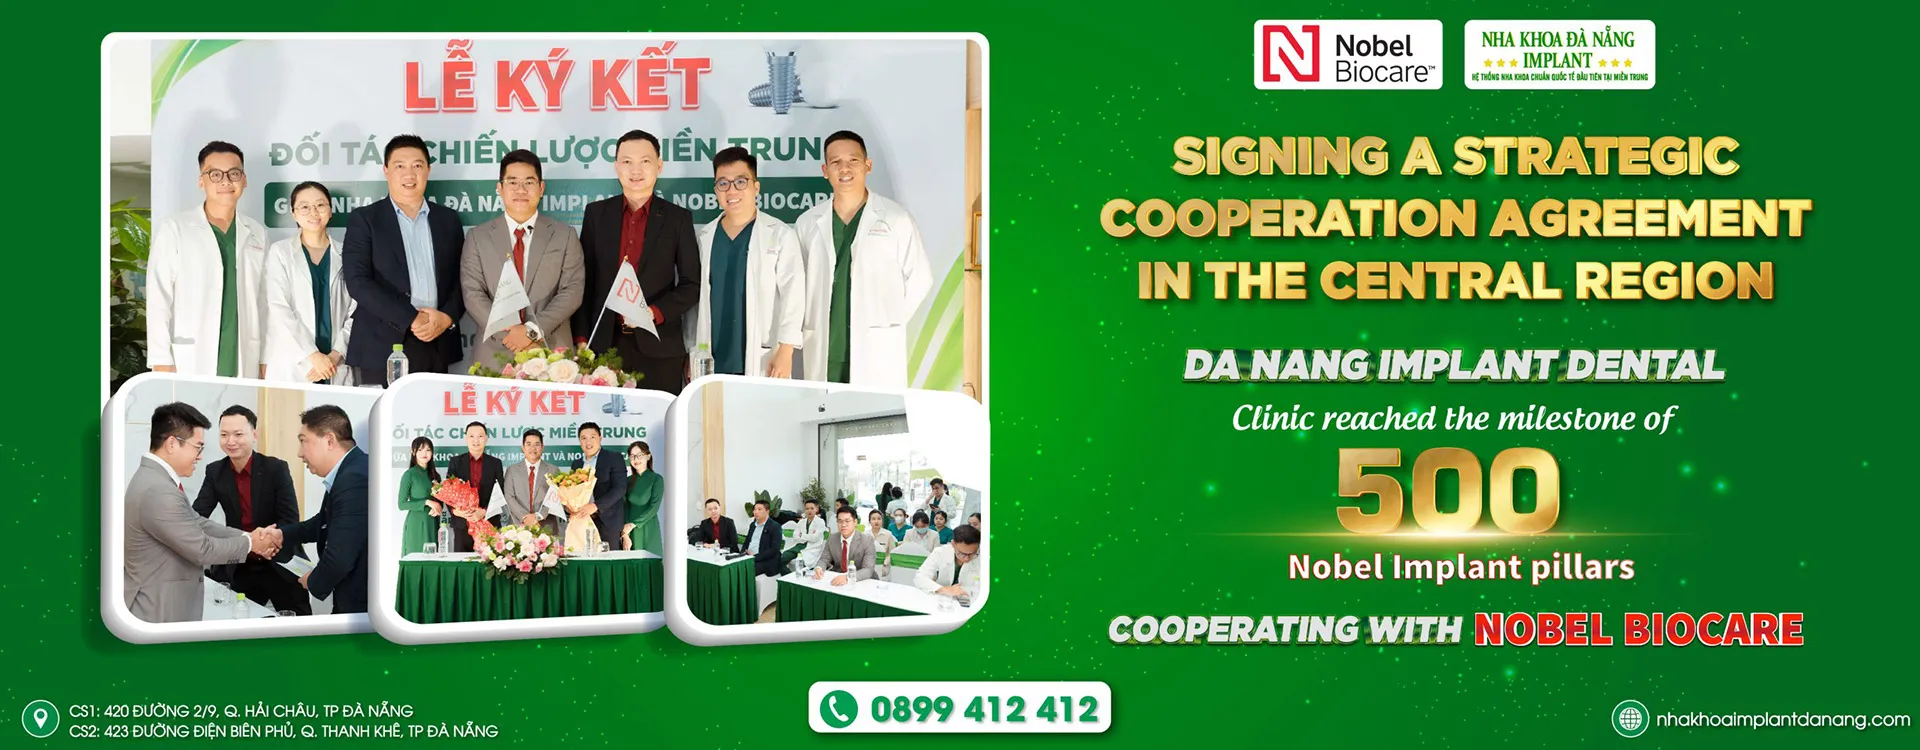 Da Nang Implant Dental has become a strategic partner of the Central Region of Nobel Biocare through the “Signing a strategic partnership in the Central region” event taking place on October 23.